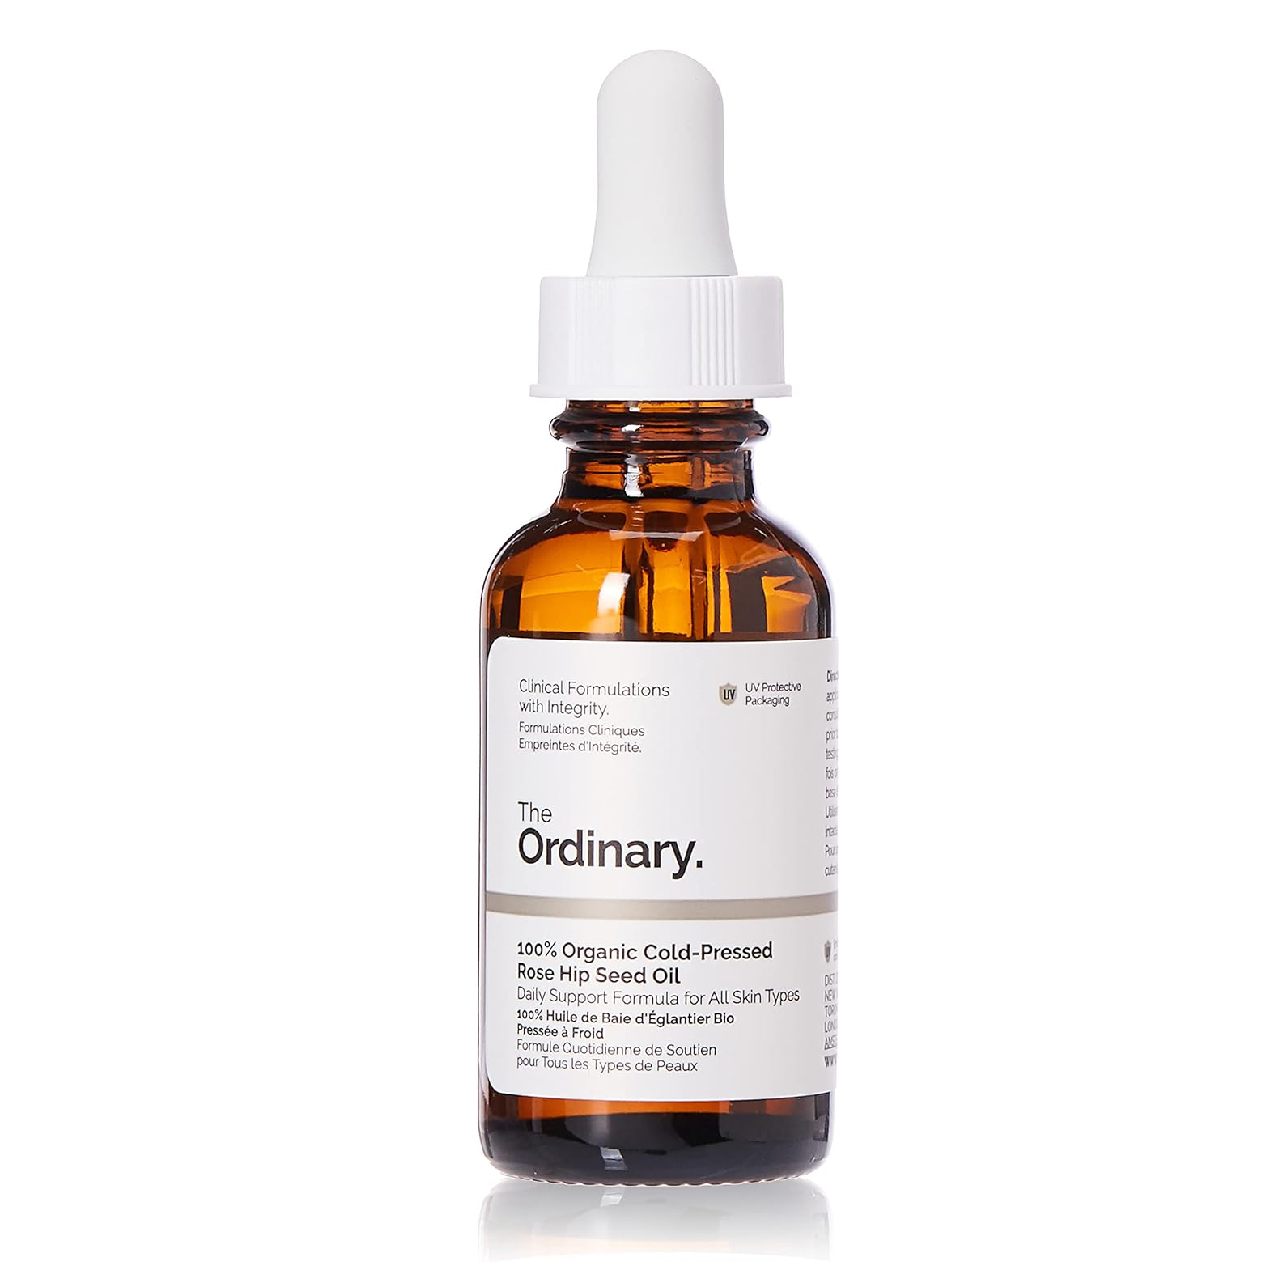 Bottle of The Ordinary 100Percent Organic Cold-Pressed Rose Hip Seed Oil on a clean background